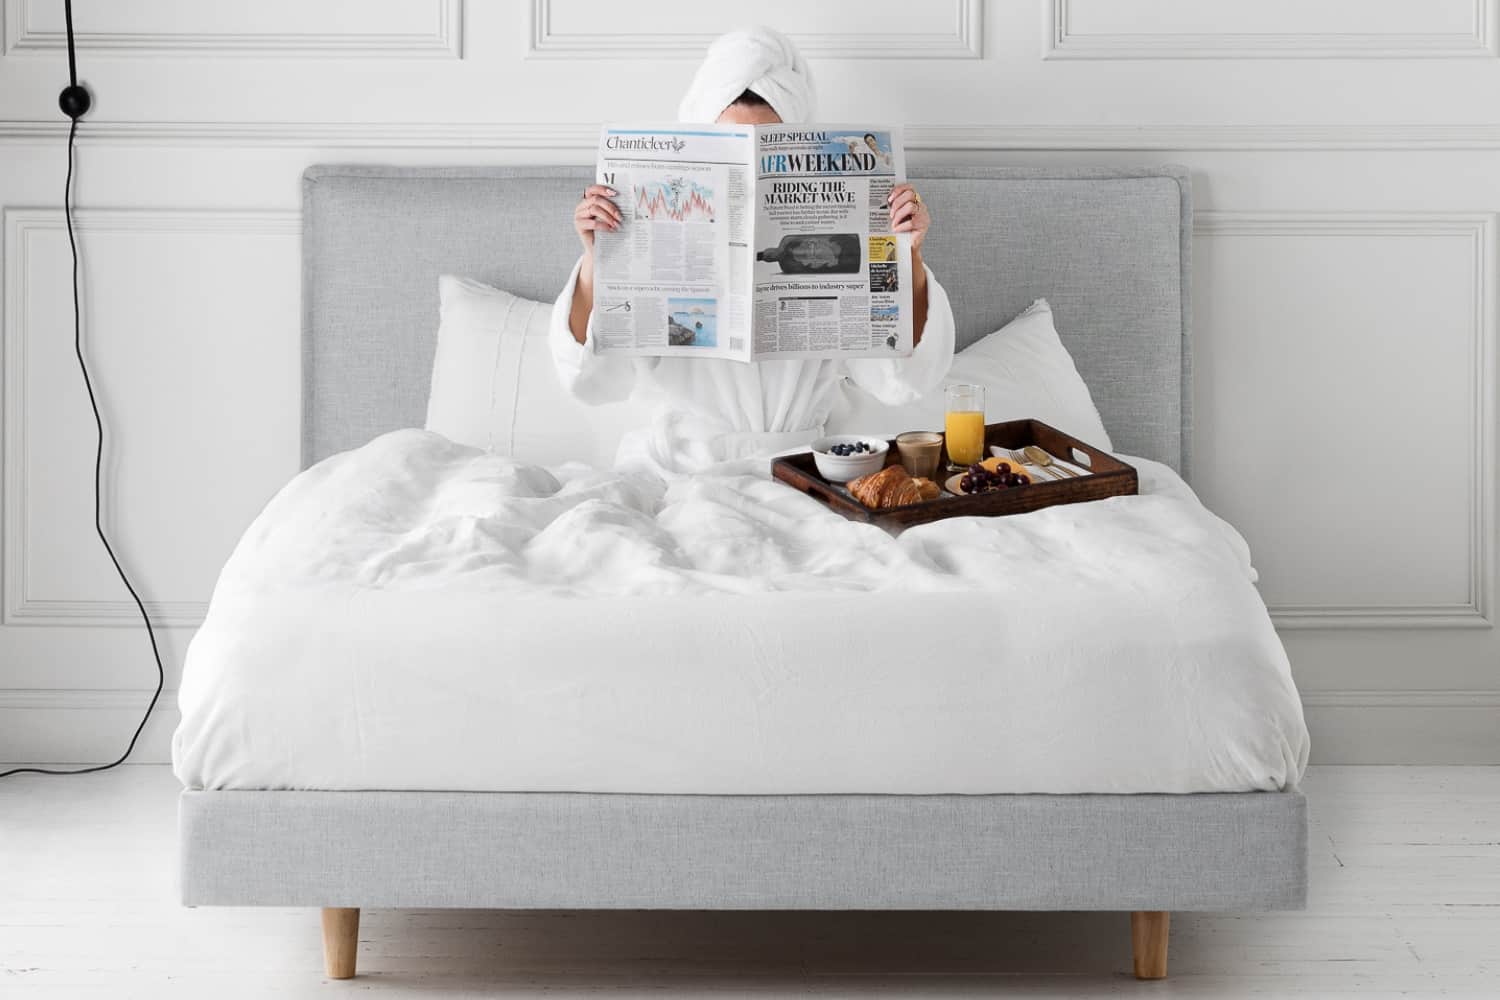 The Heatherly Designed Readymade Rupert Bed in Husk Ice Linen, Concierge Collection